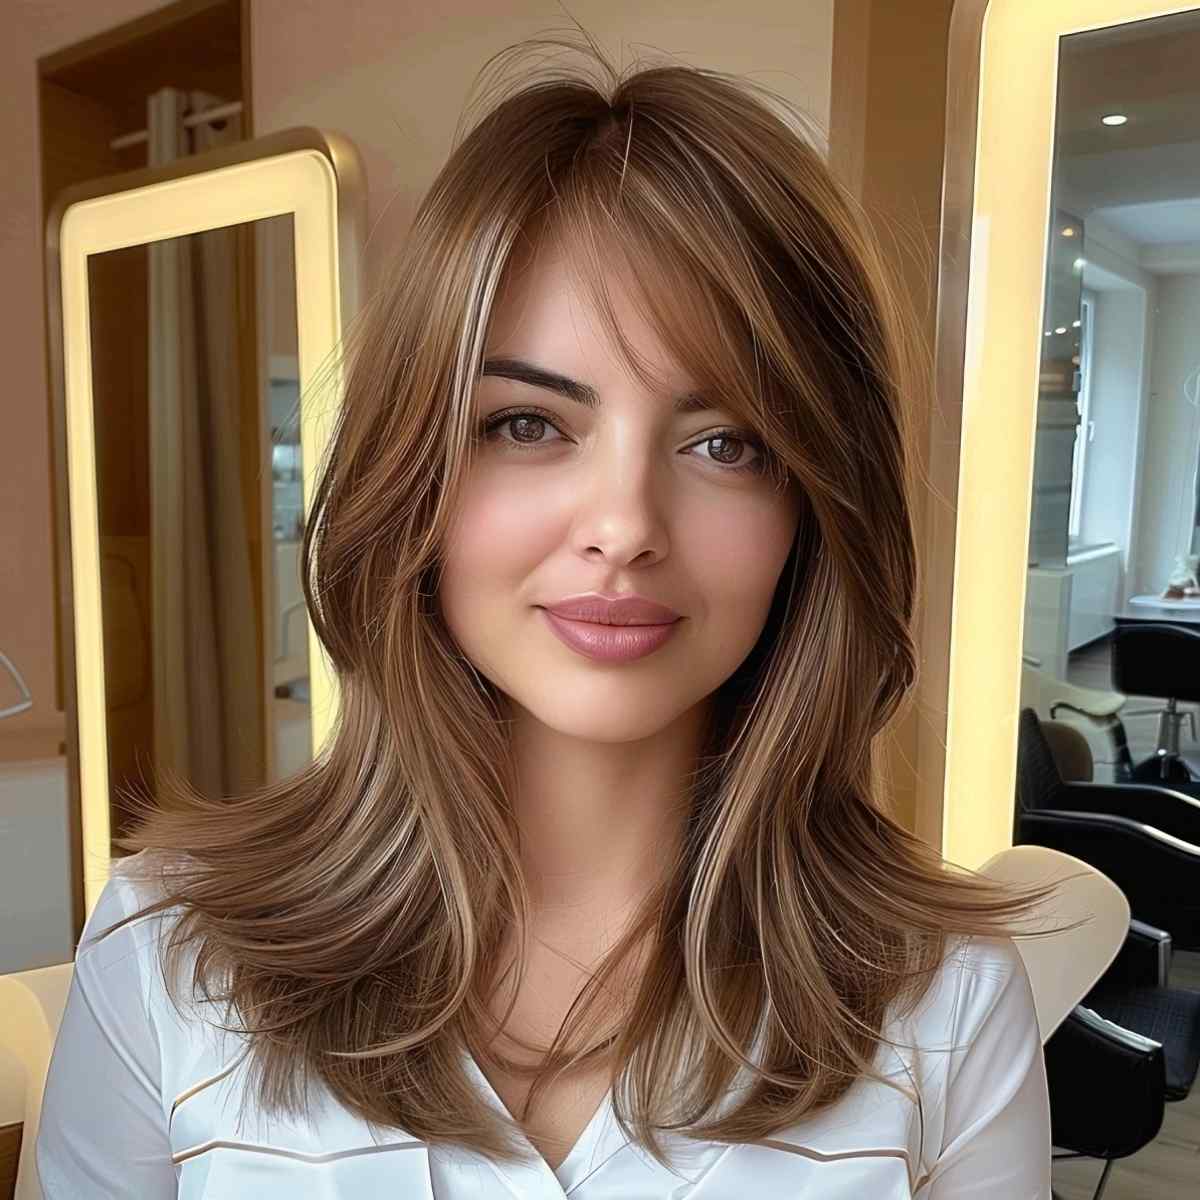 Youthful mid-length layered cut with side bangs